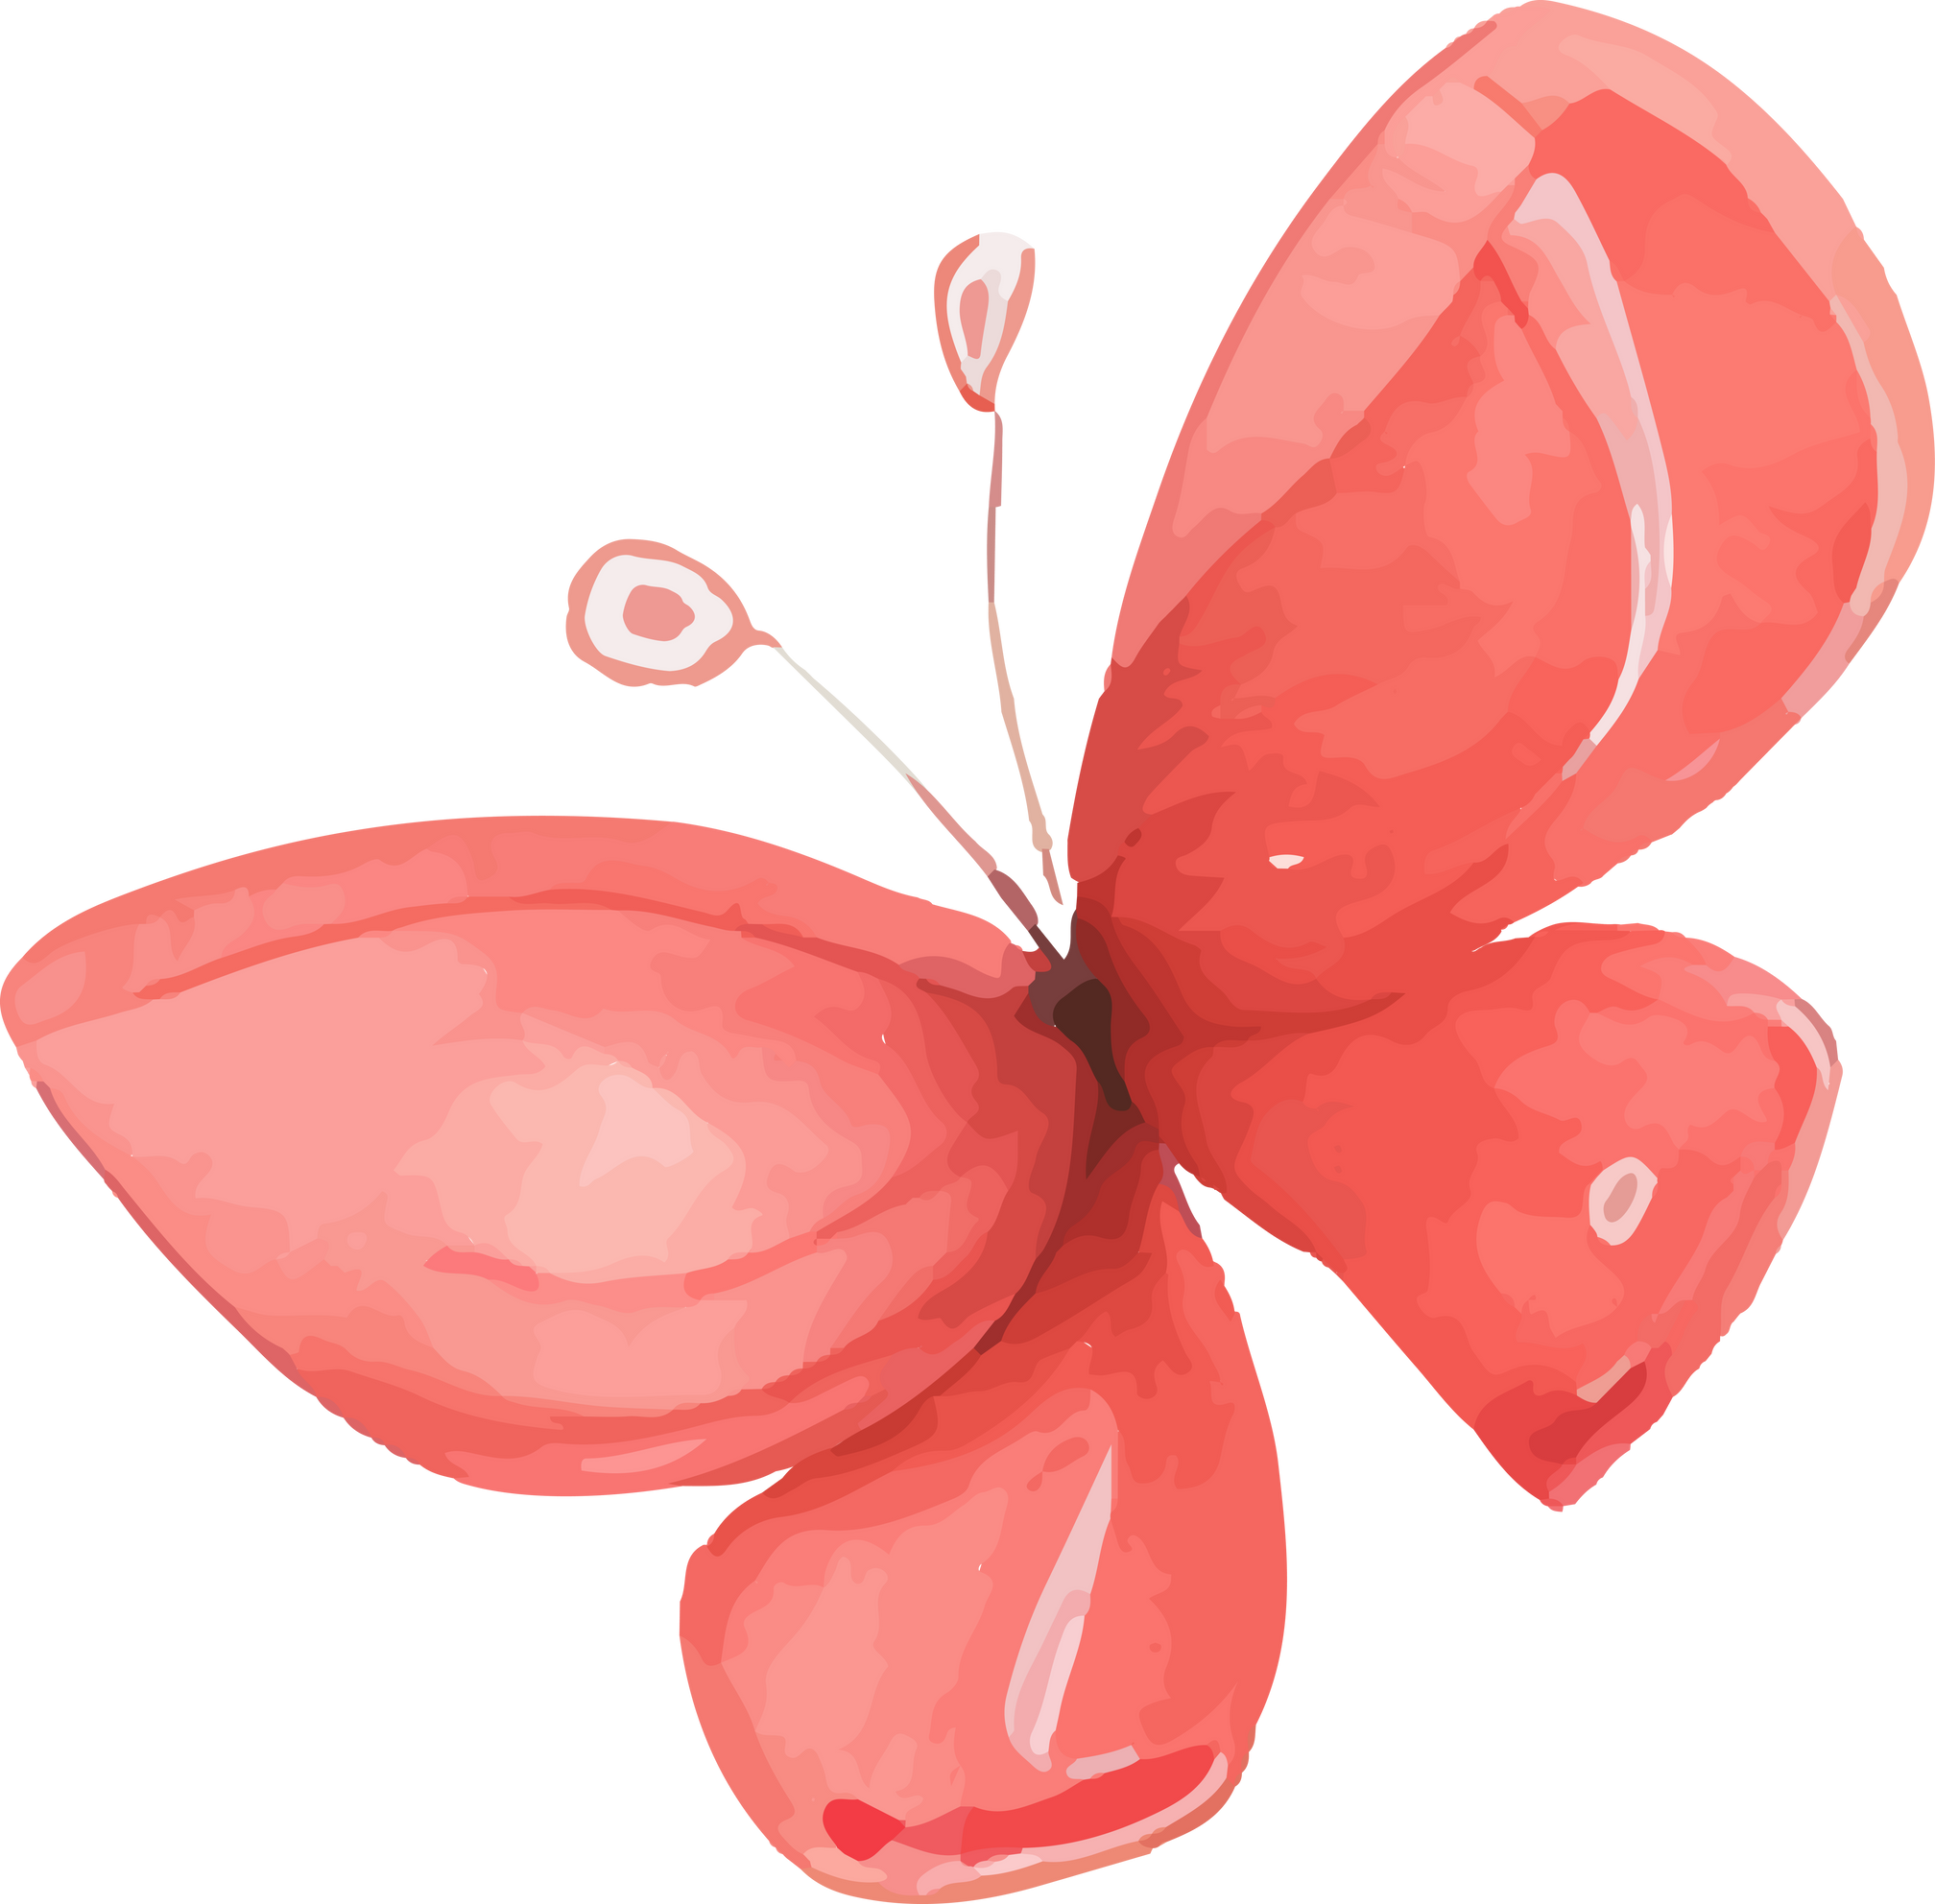 Red Butterfly Watercolor Illustration